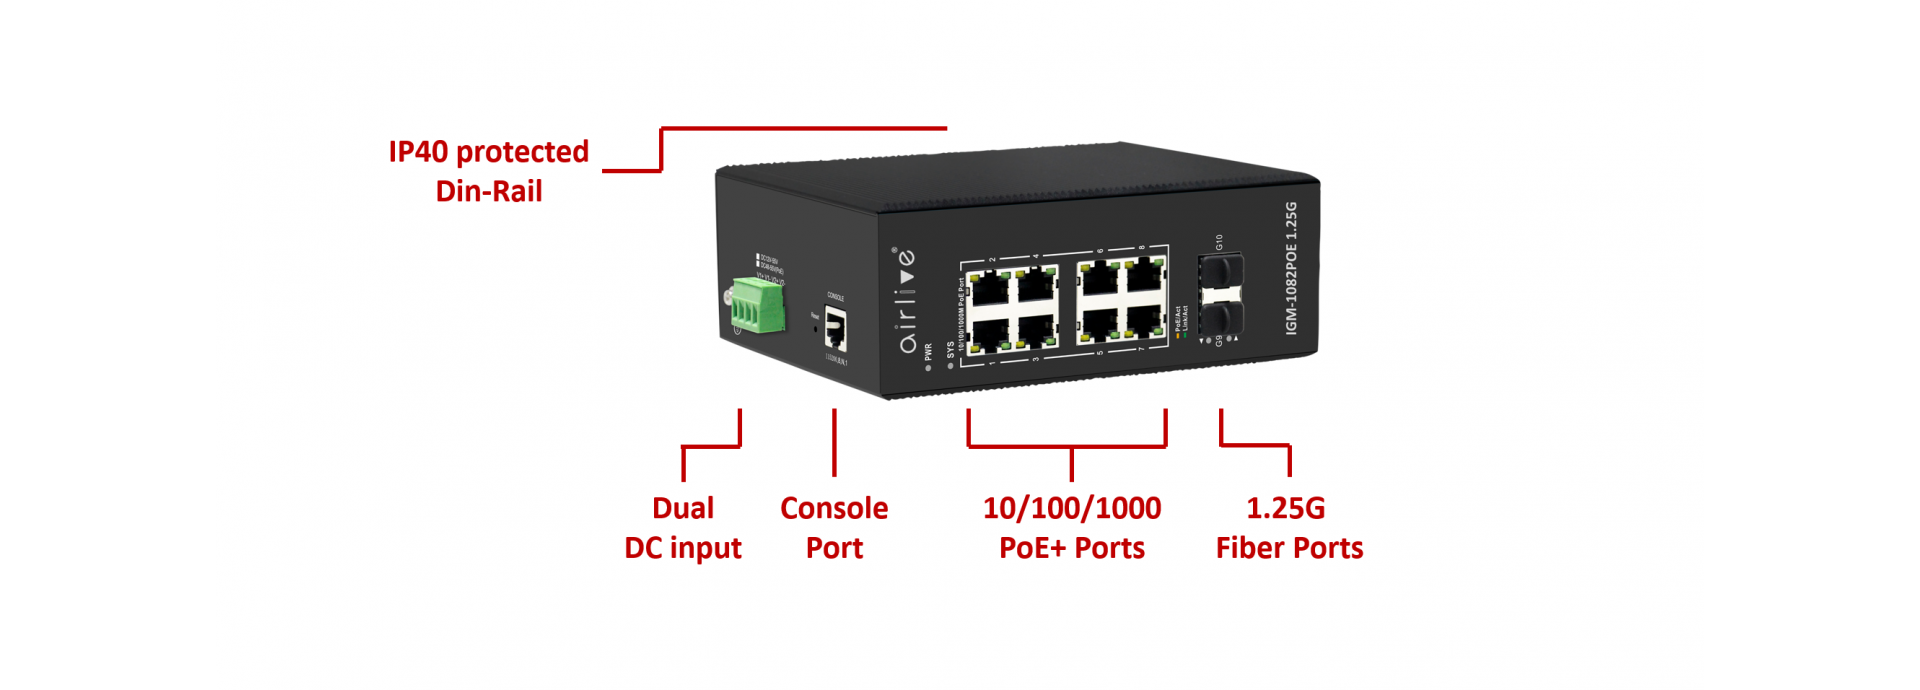 Reliable Industrial-grade Managed POE Switch for extreme environment  With VLAN and QoS